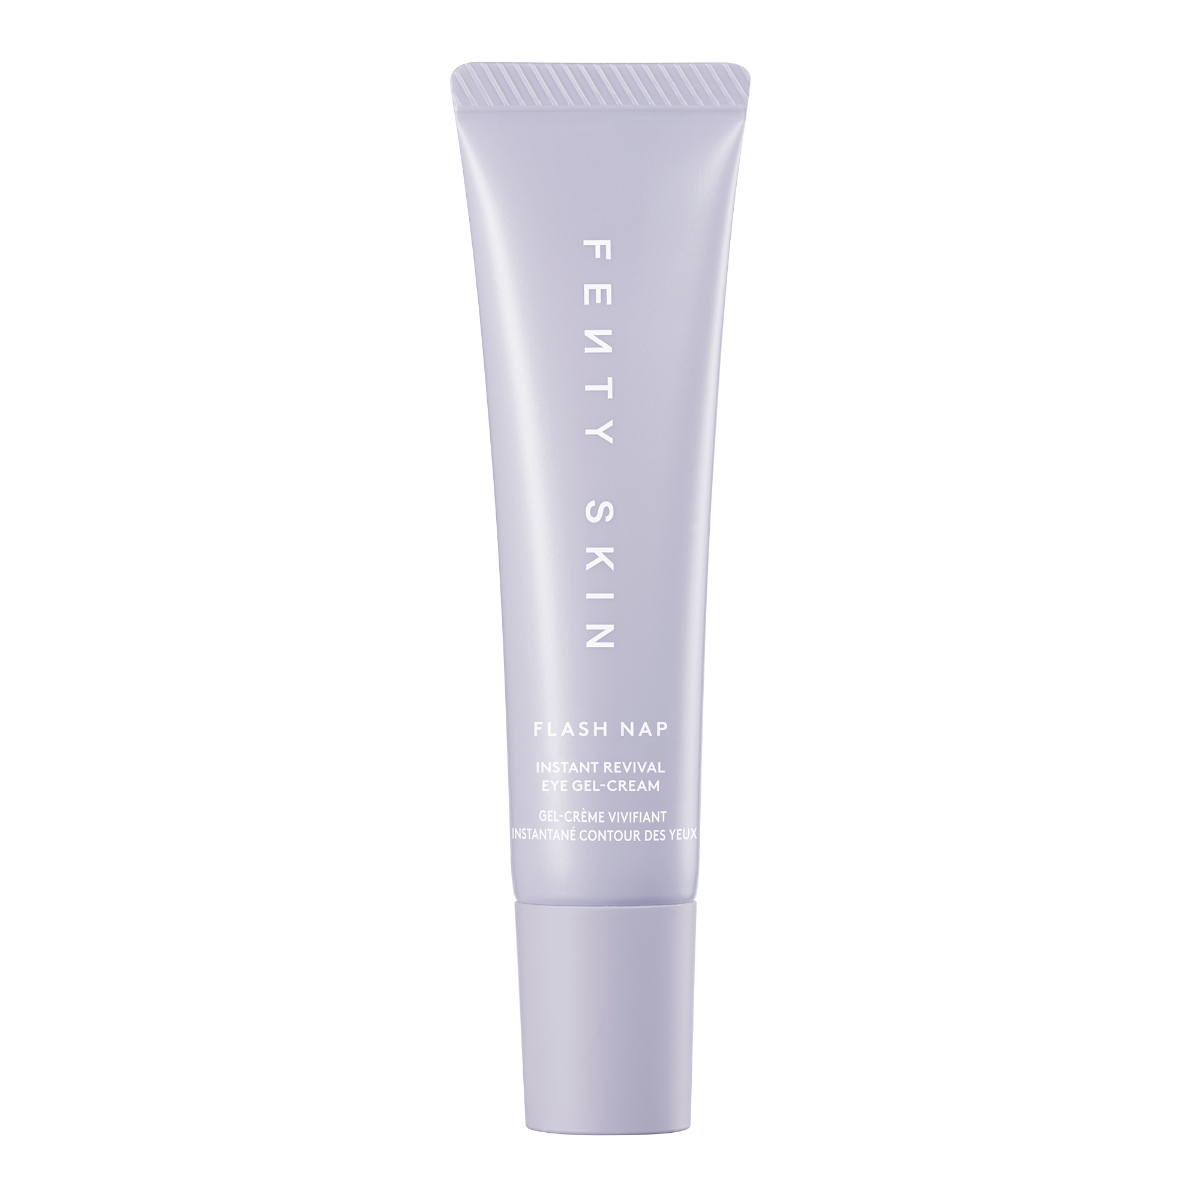 Dark Circles + Puffiness Can Chill New Flash Nap Instant Revival Eye Gel-Cream